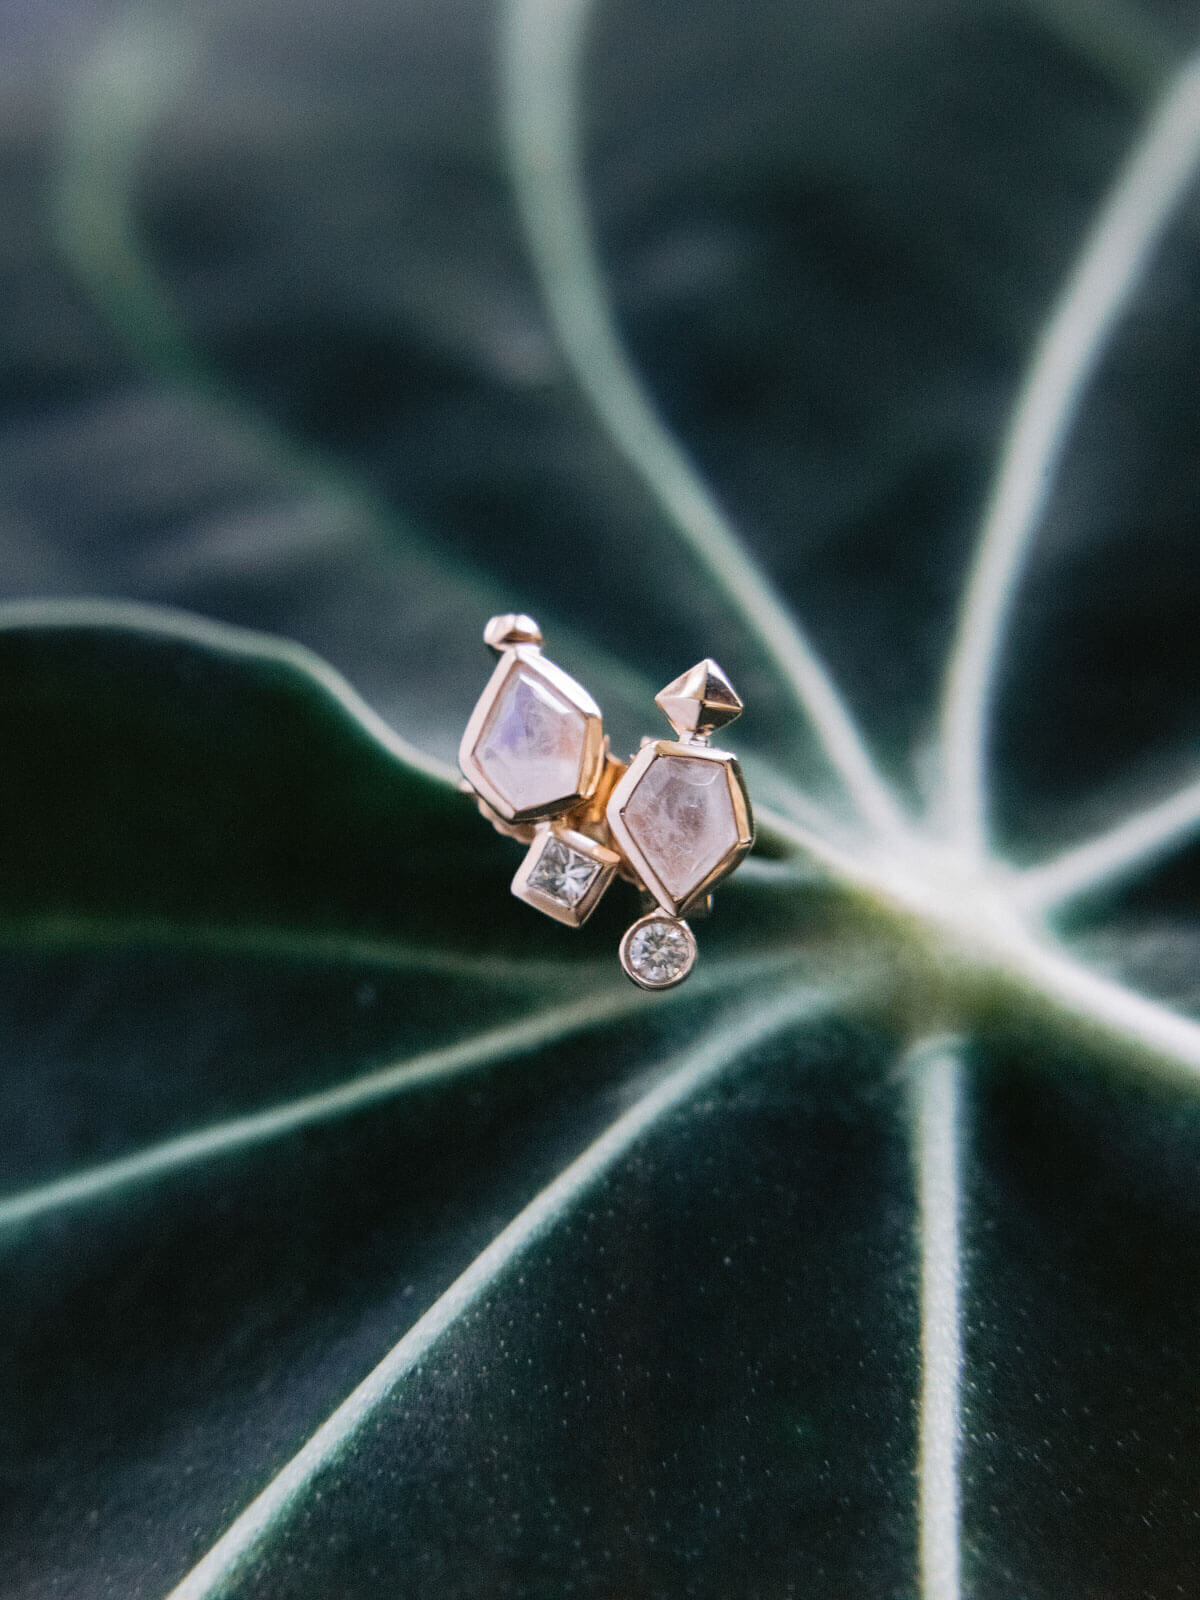 Pentagon-shaped earrings with diamonds in Montage at Palmetto Bluff. Destination wedding image by Jenny Fu Studio